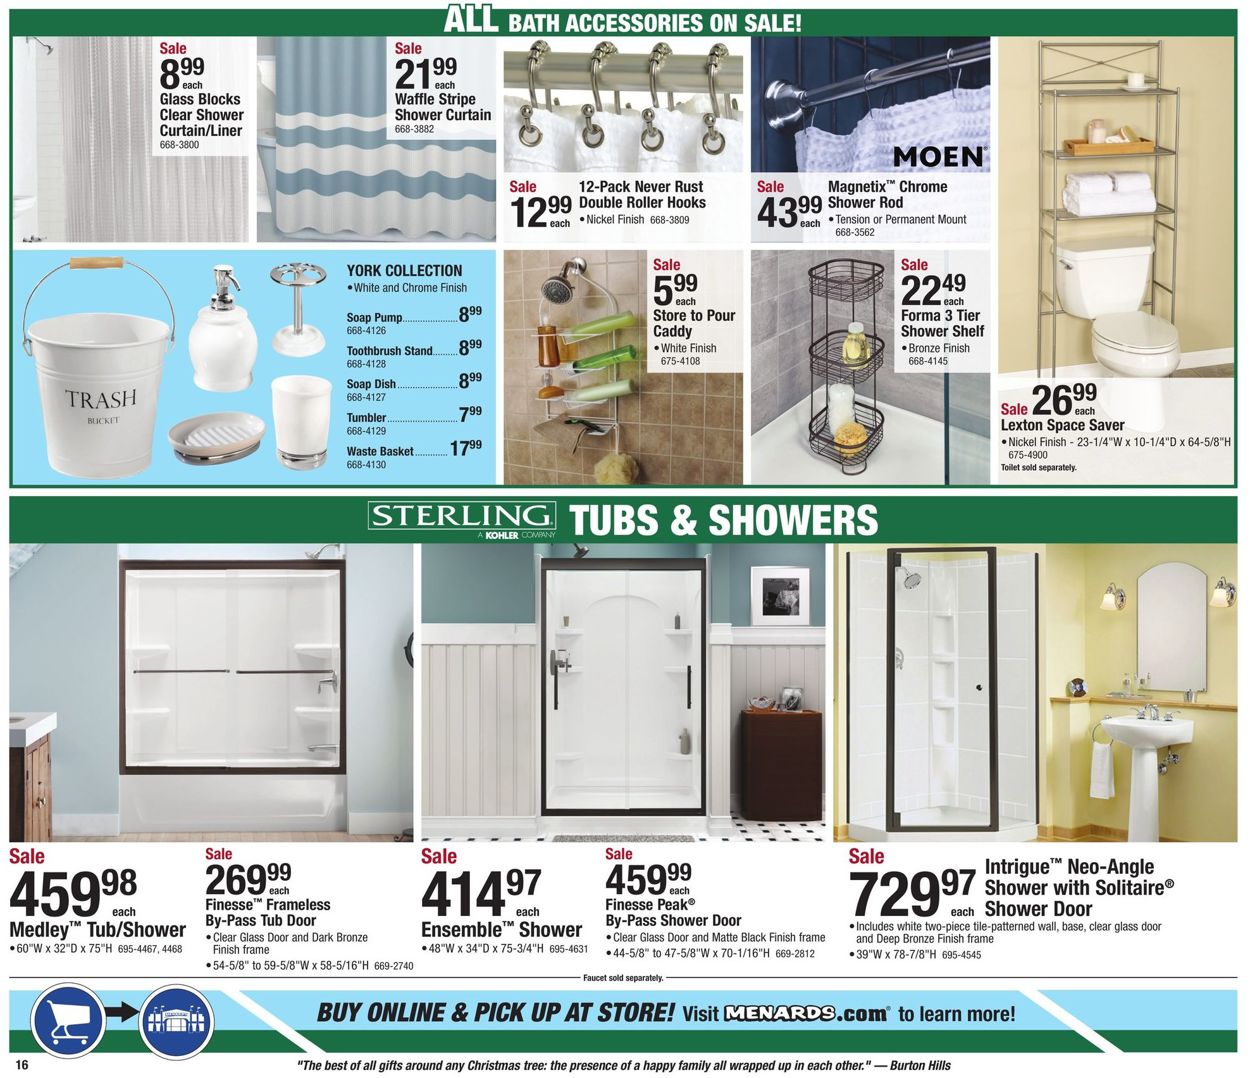 Menards - Christmas Sale Ad 2019 Current weekly ad 12/15 - 12/24/2019 [19] - 0